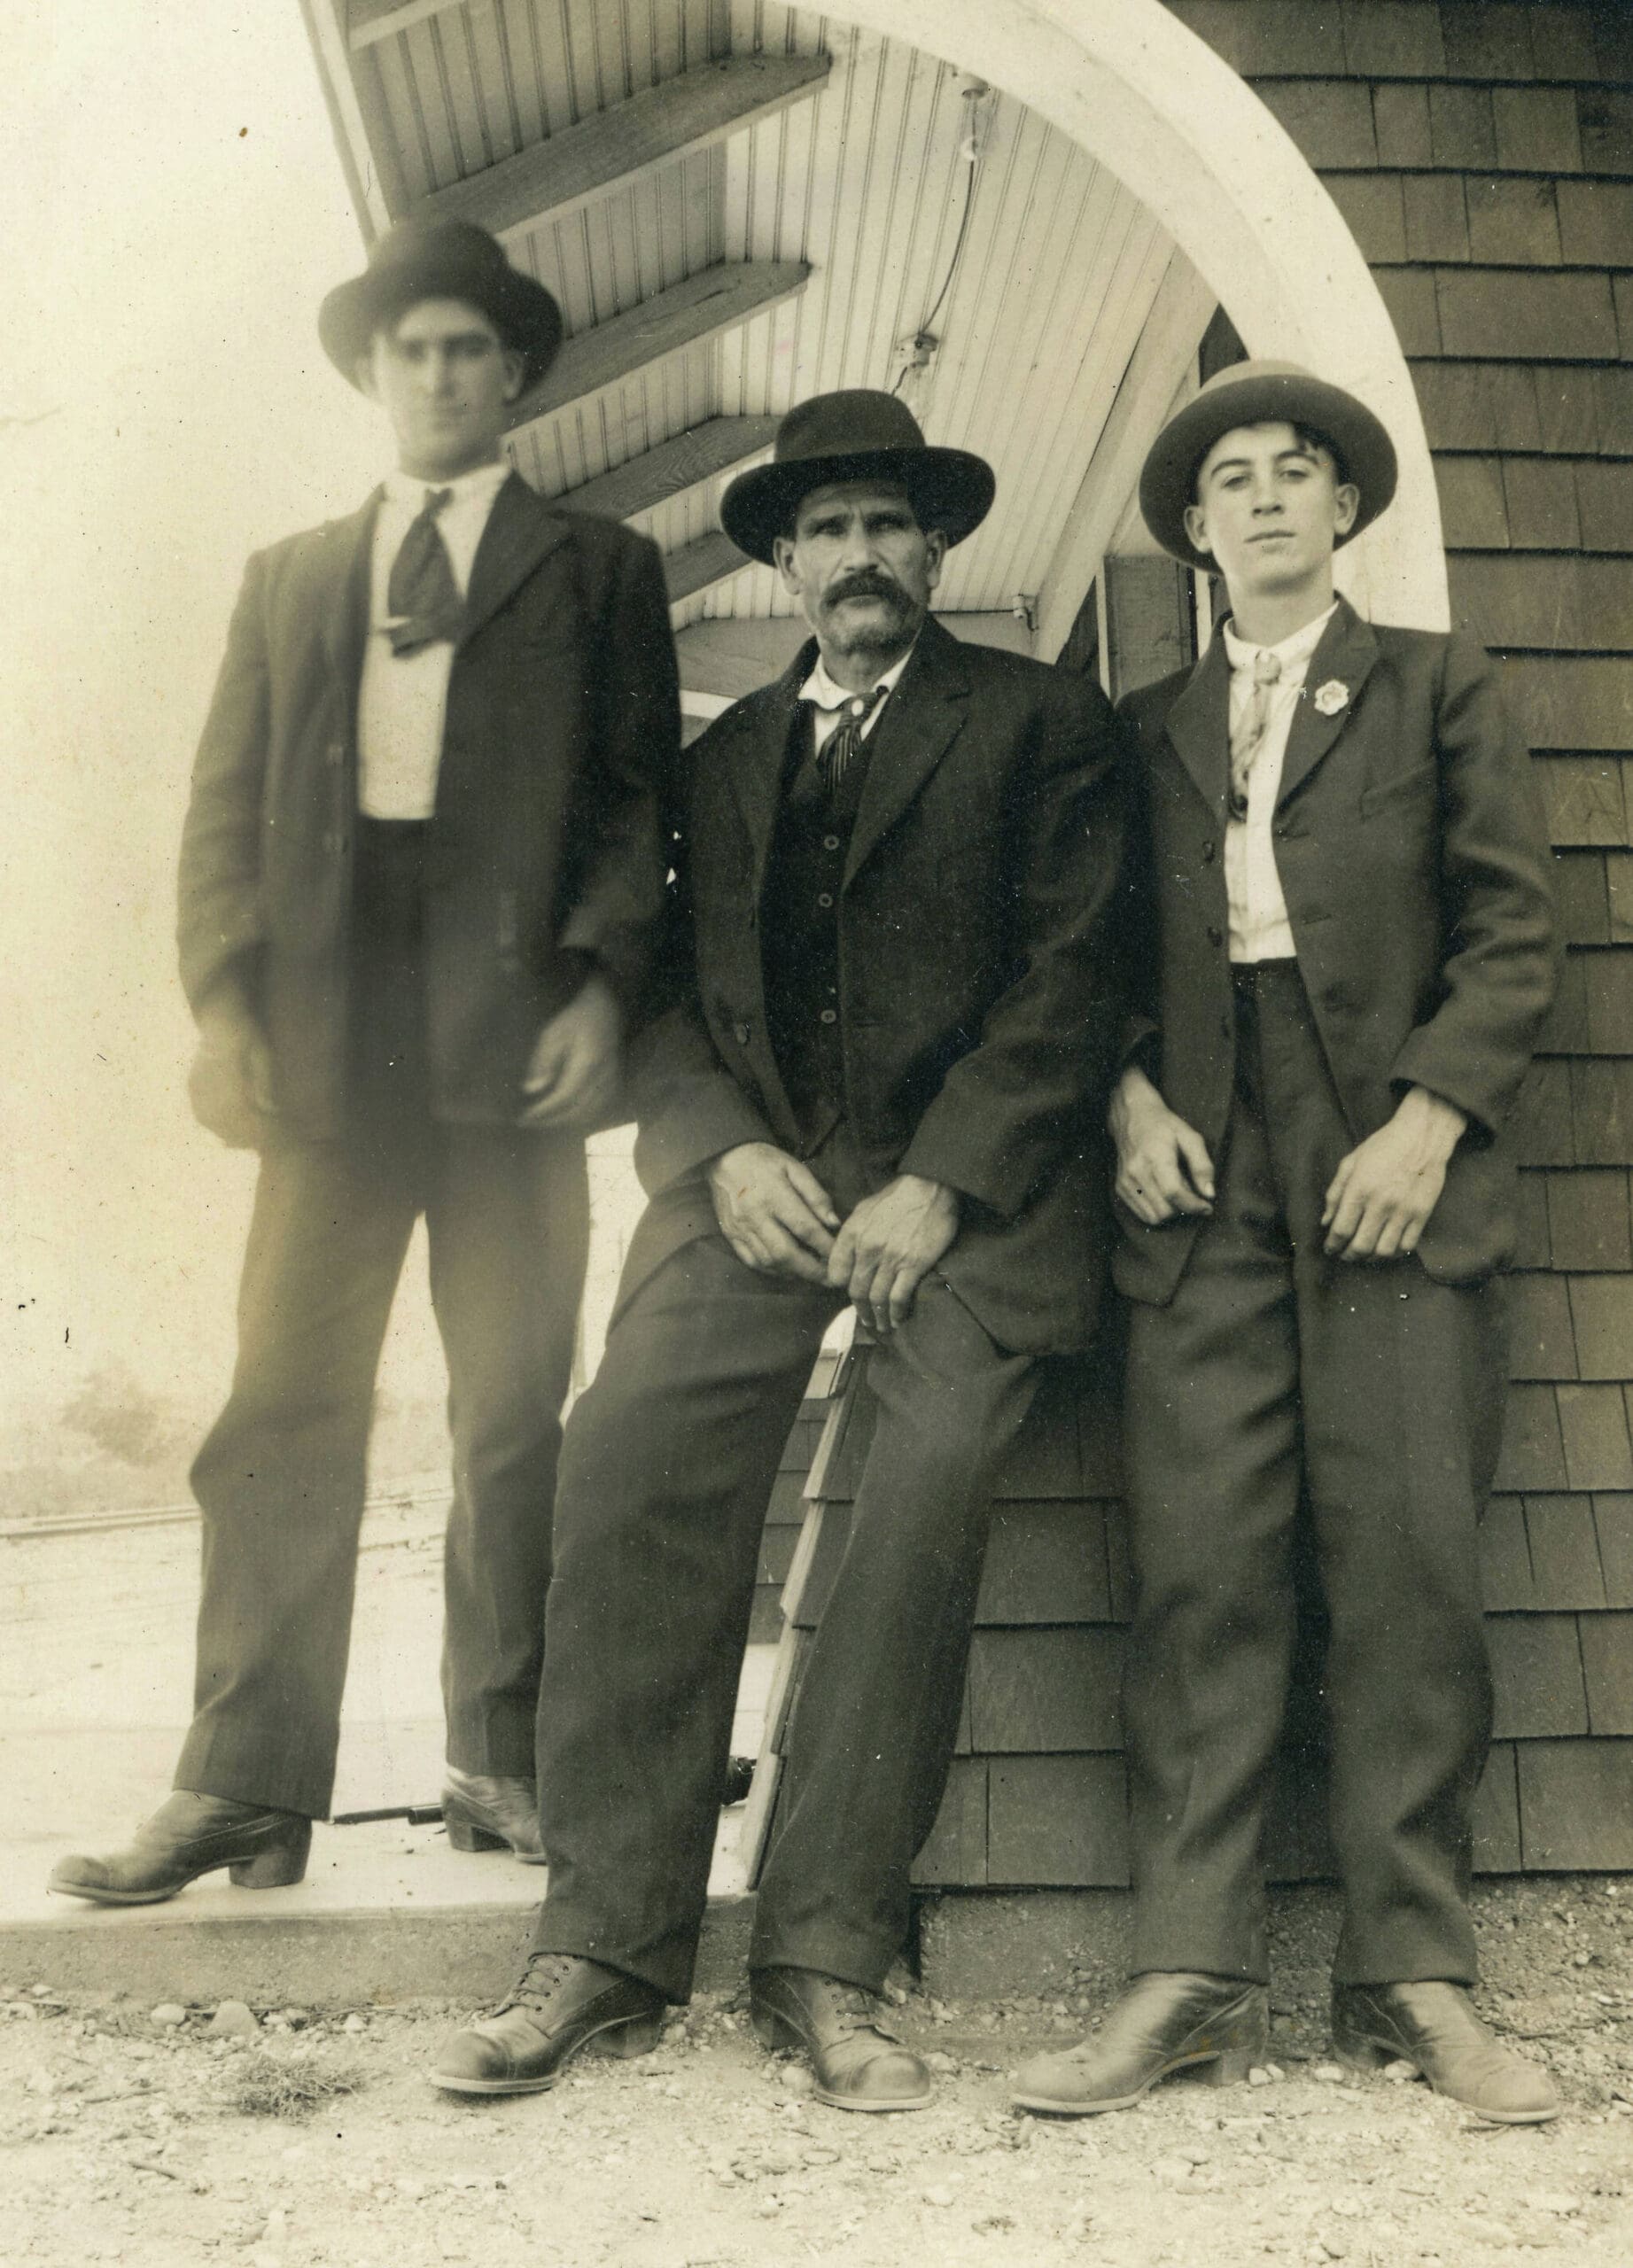 Photo courtesy of the Keeler Family Collection
Lawrence Keeler (left) poses with his father and younger brother (Dewey) in about 1920.